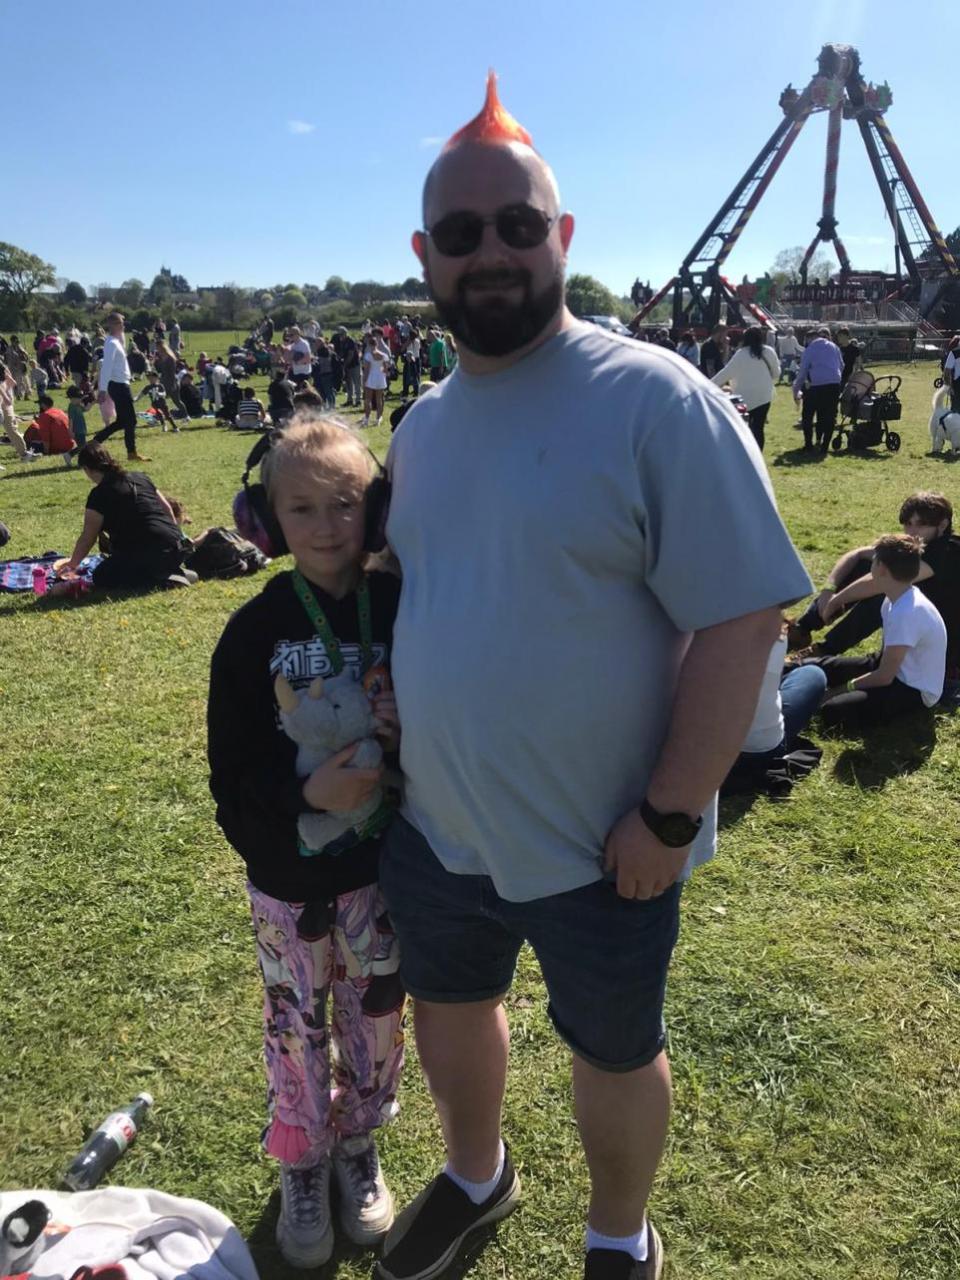 Dorset Echo: Christopher Downey from Guildford visited the festival with his daughter Evelyn